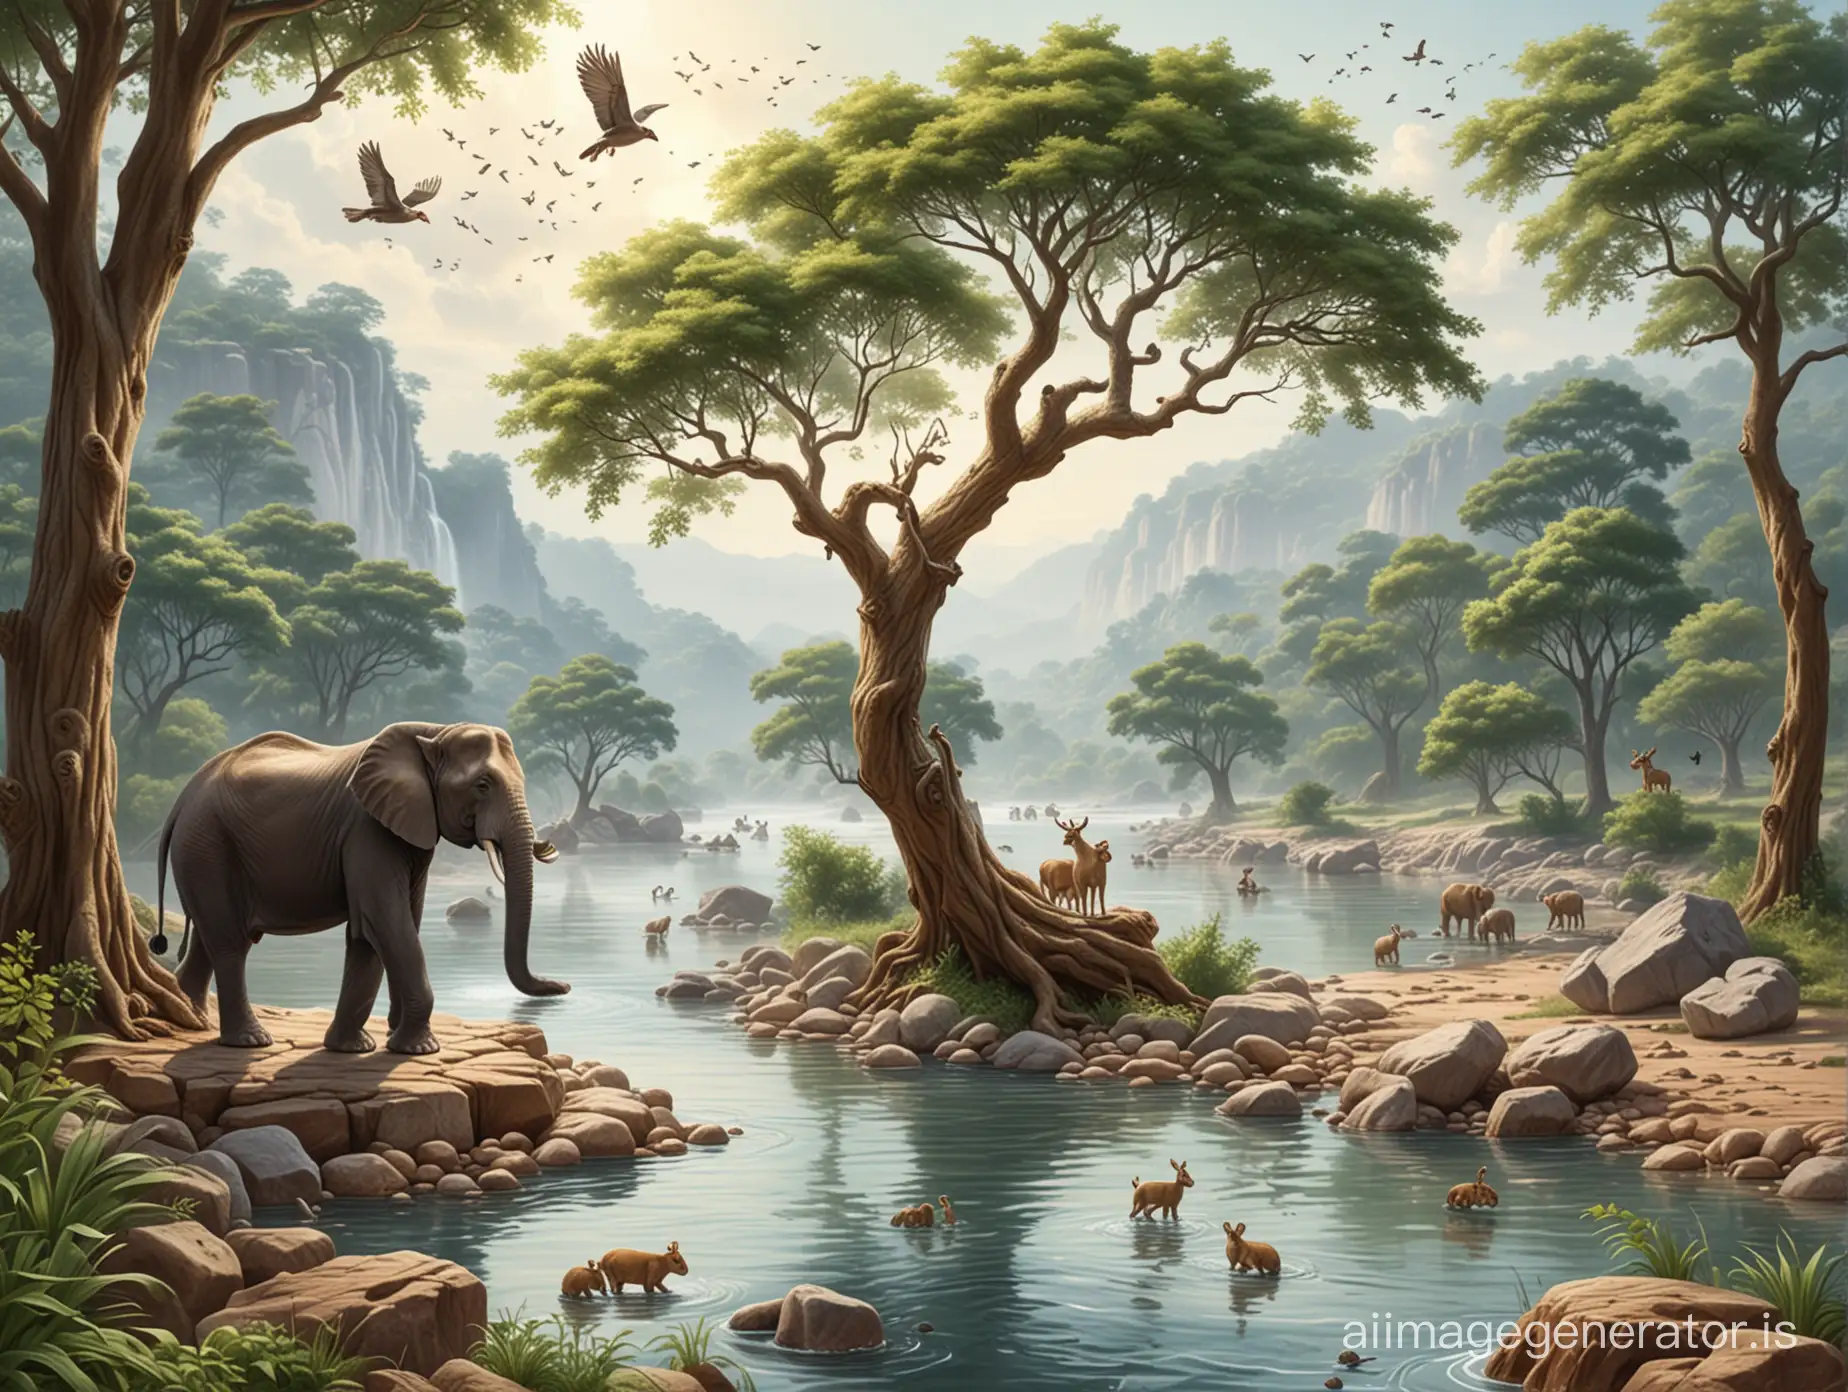 Create a detailed illustration of a river and a tree near that and rocks around, a monkey on the tree, an elephant drinking water from river, a deer drinking water from the river, rabbit drinking water from the river, birds flying, squirrel on the tree